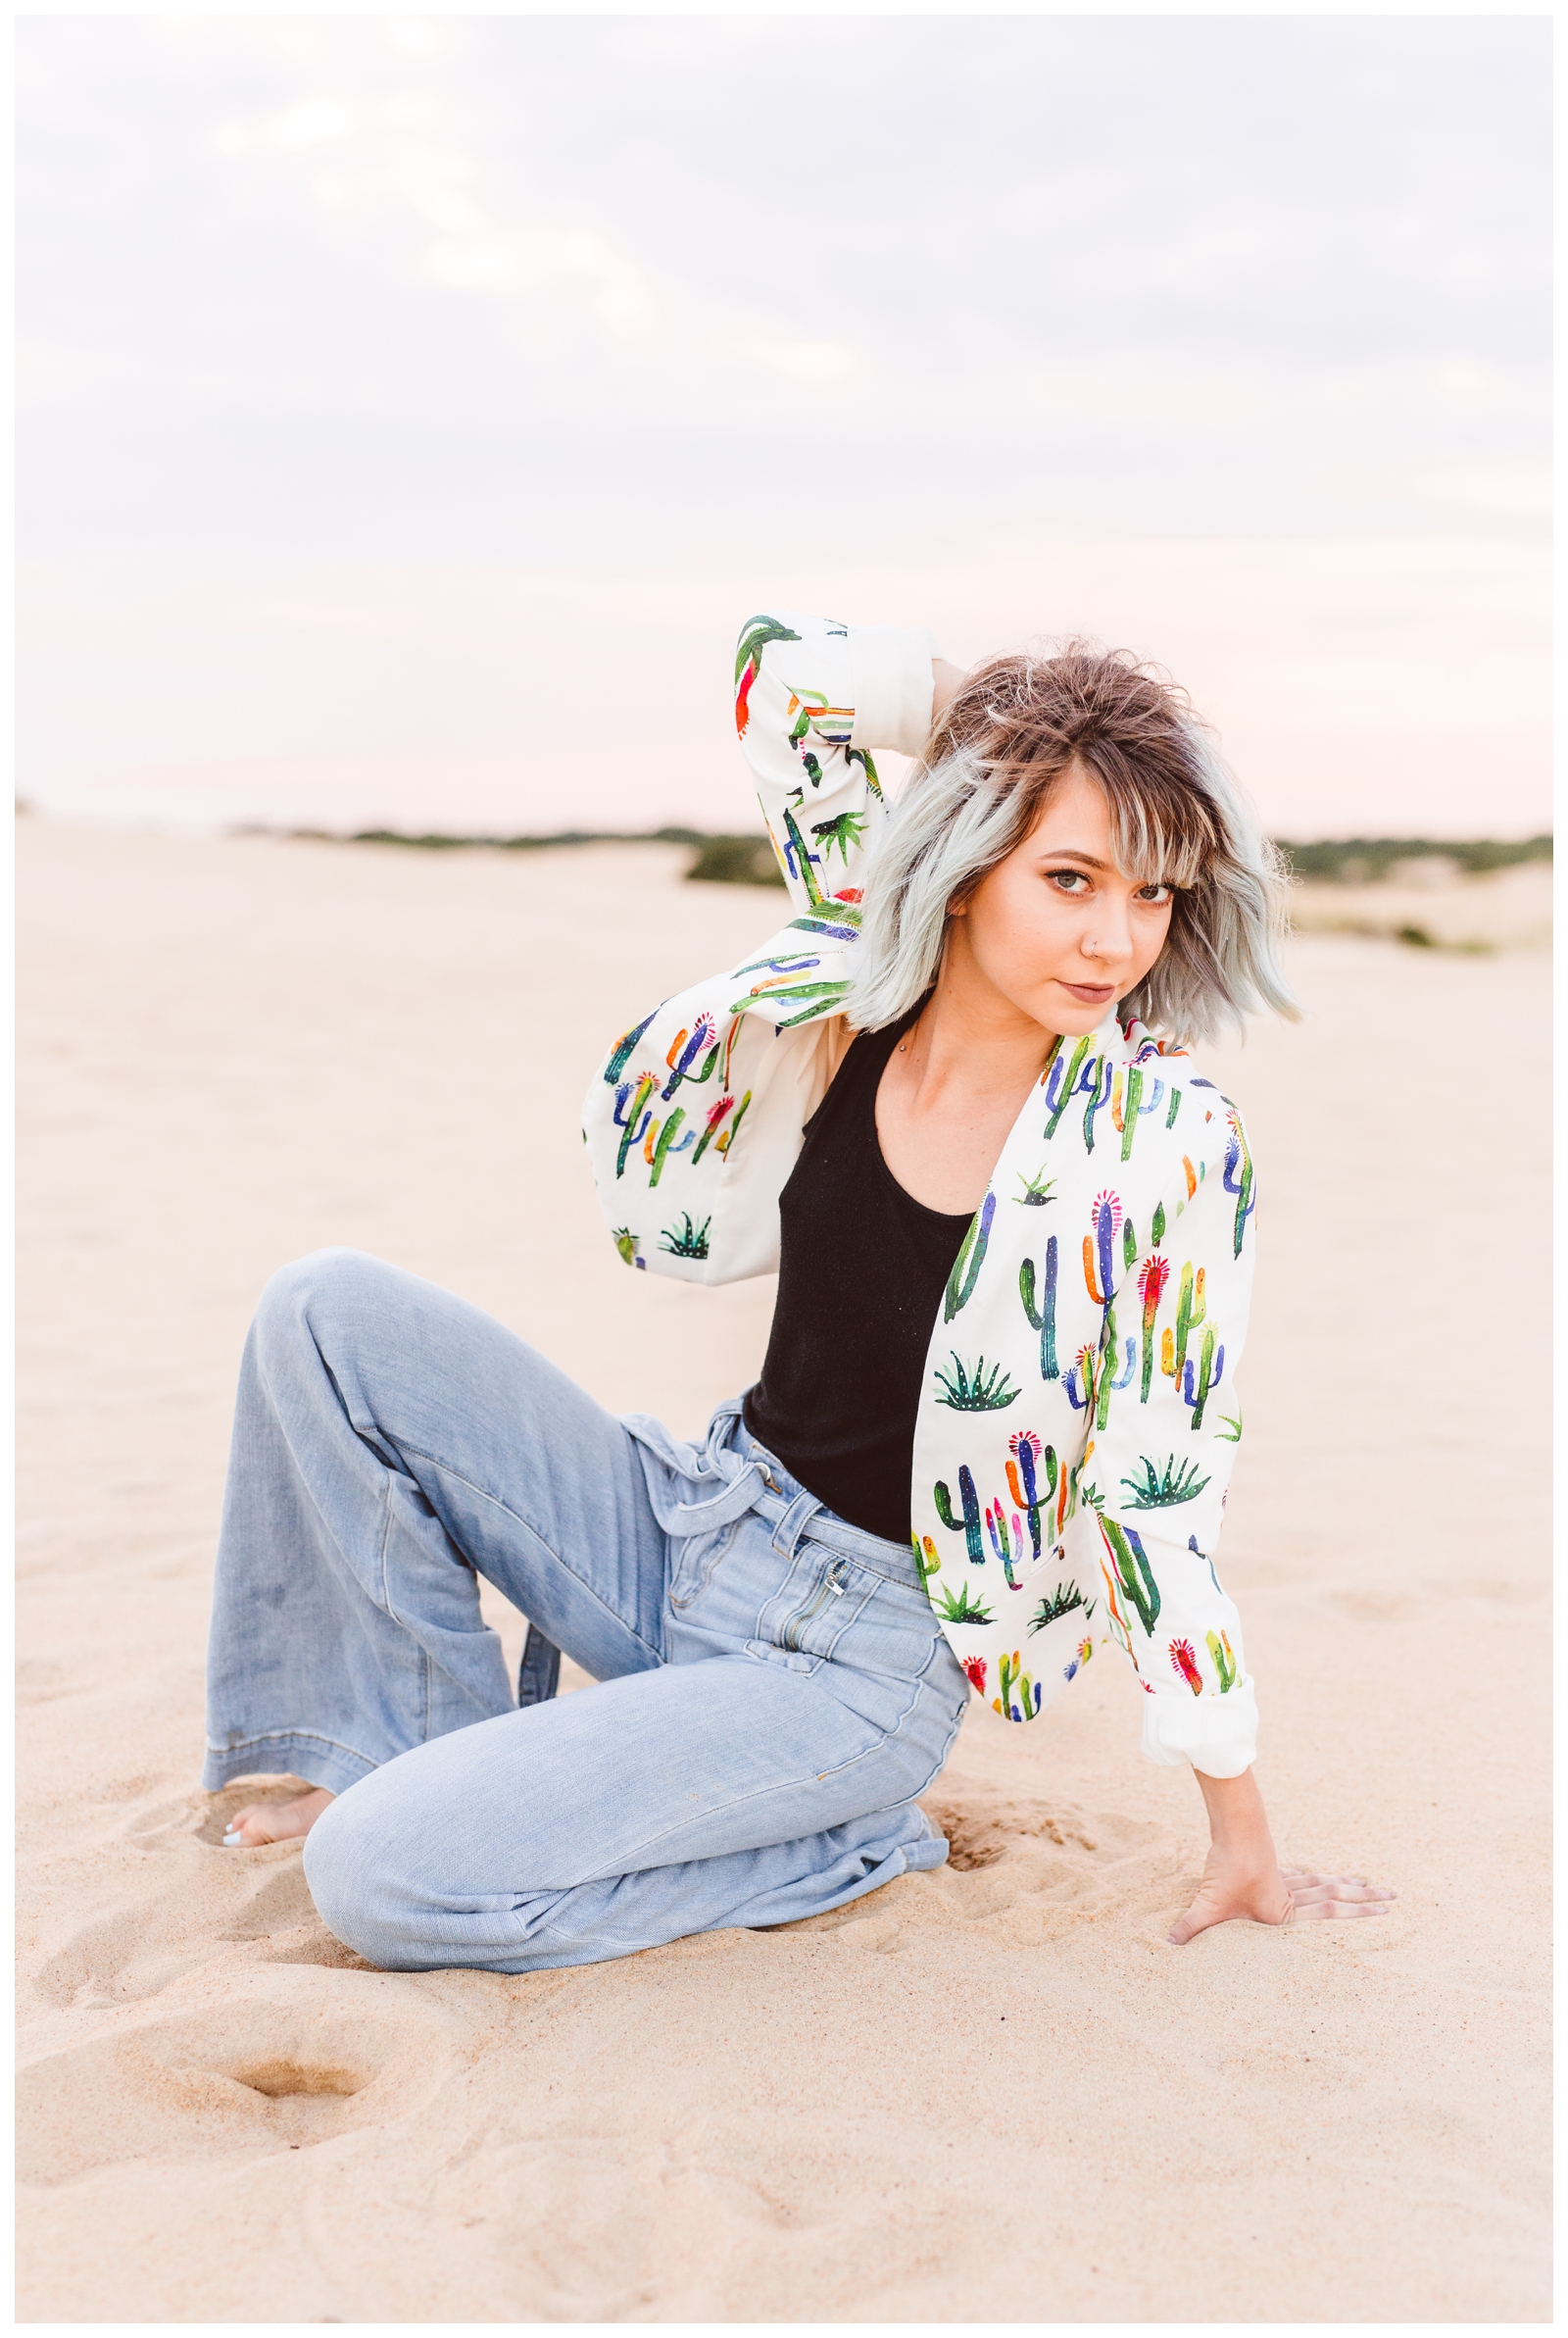 Quirky and Colorful Senior Portrait Session Inspiration - Outer Banks, North Carolina - Brooke Michelle Photography